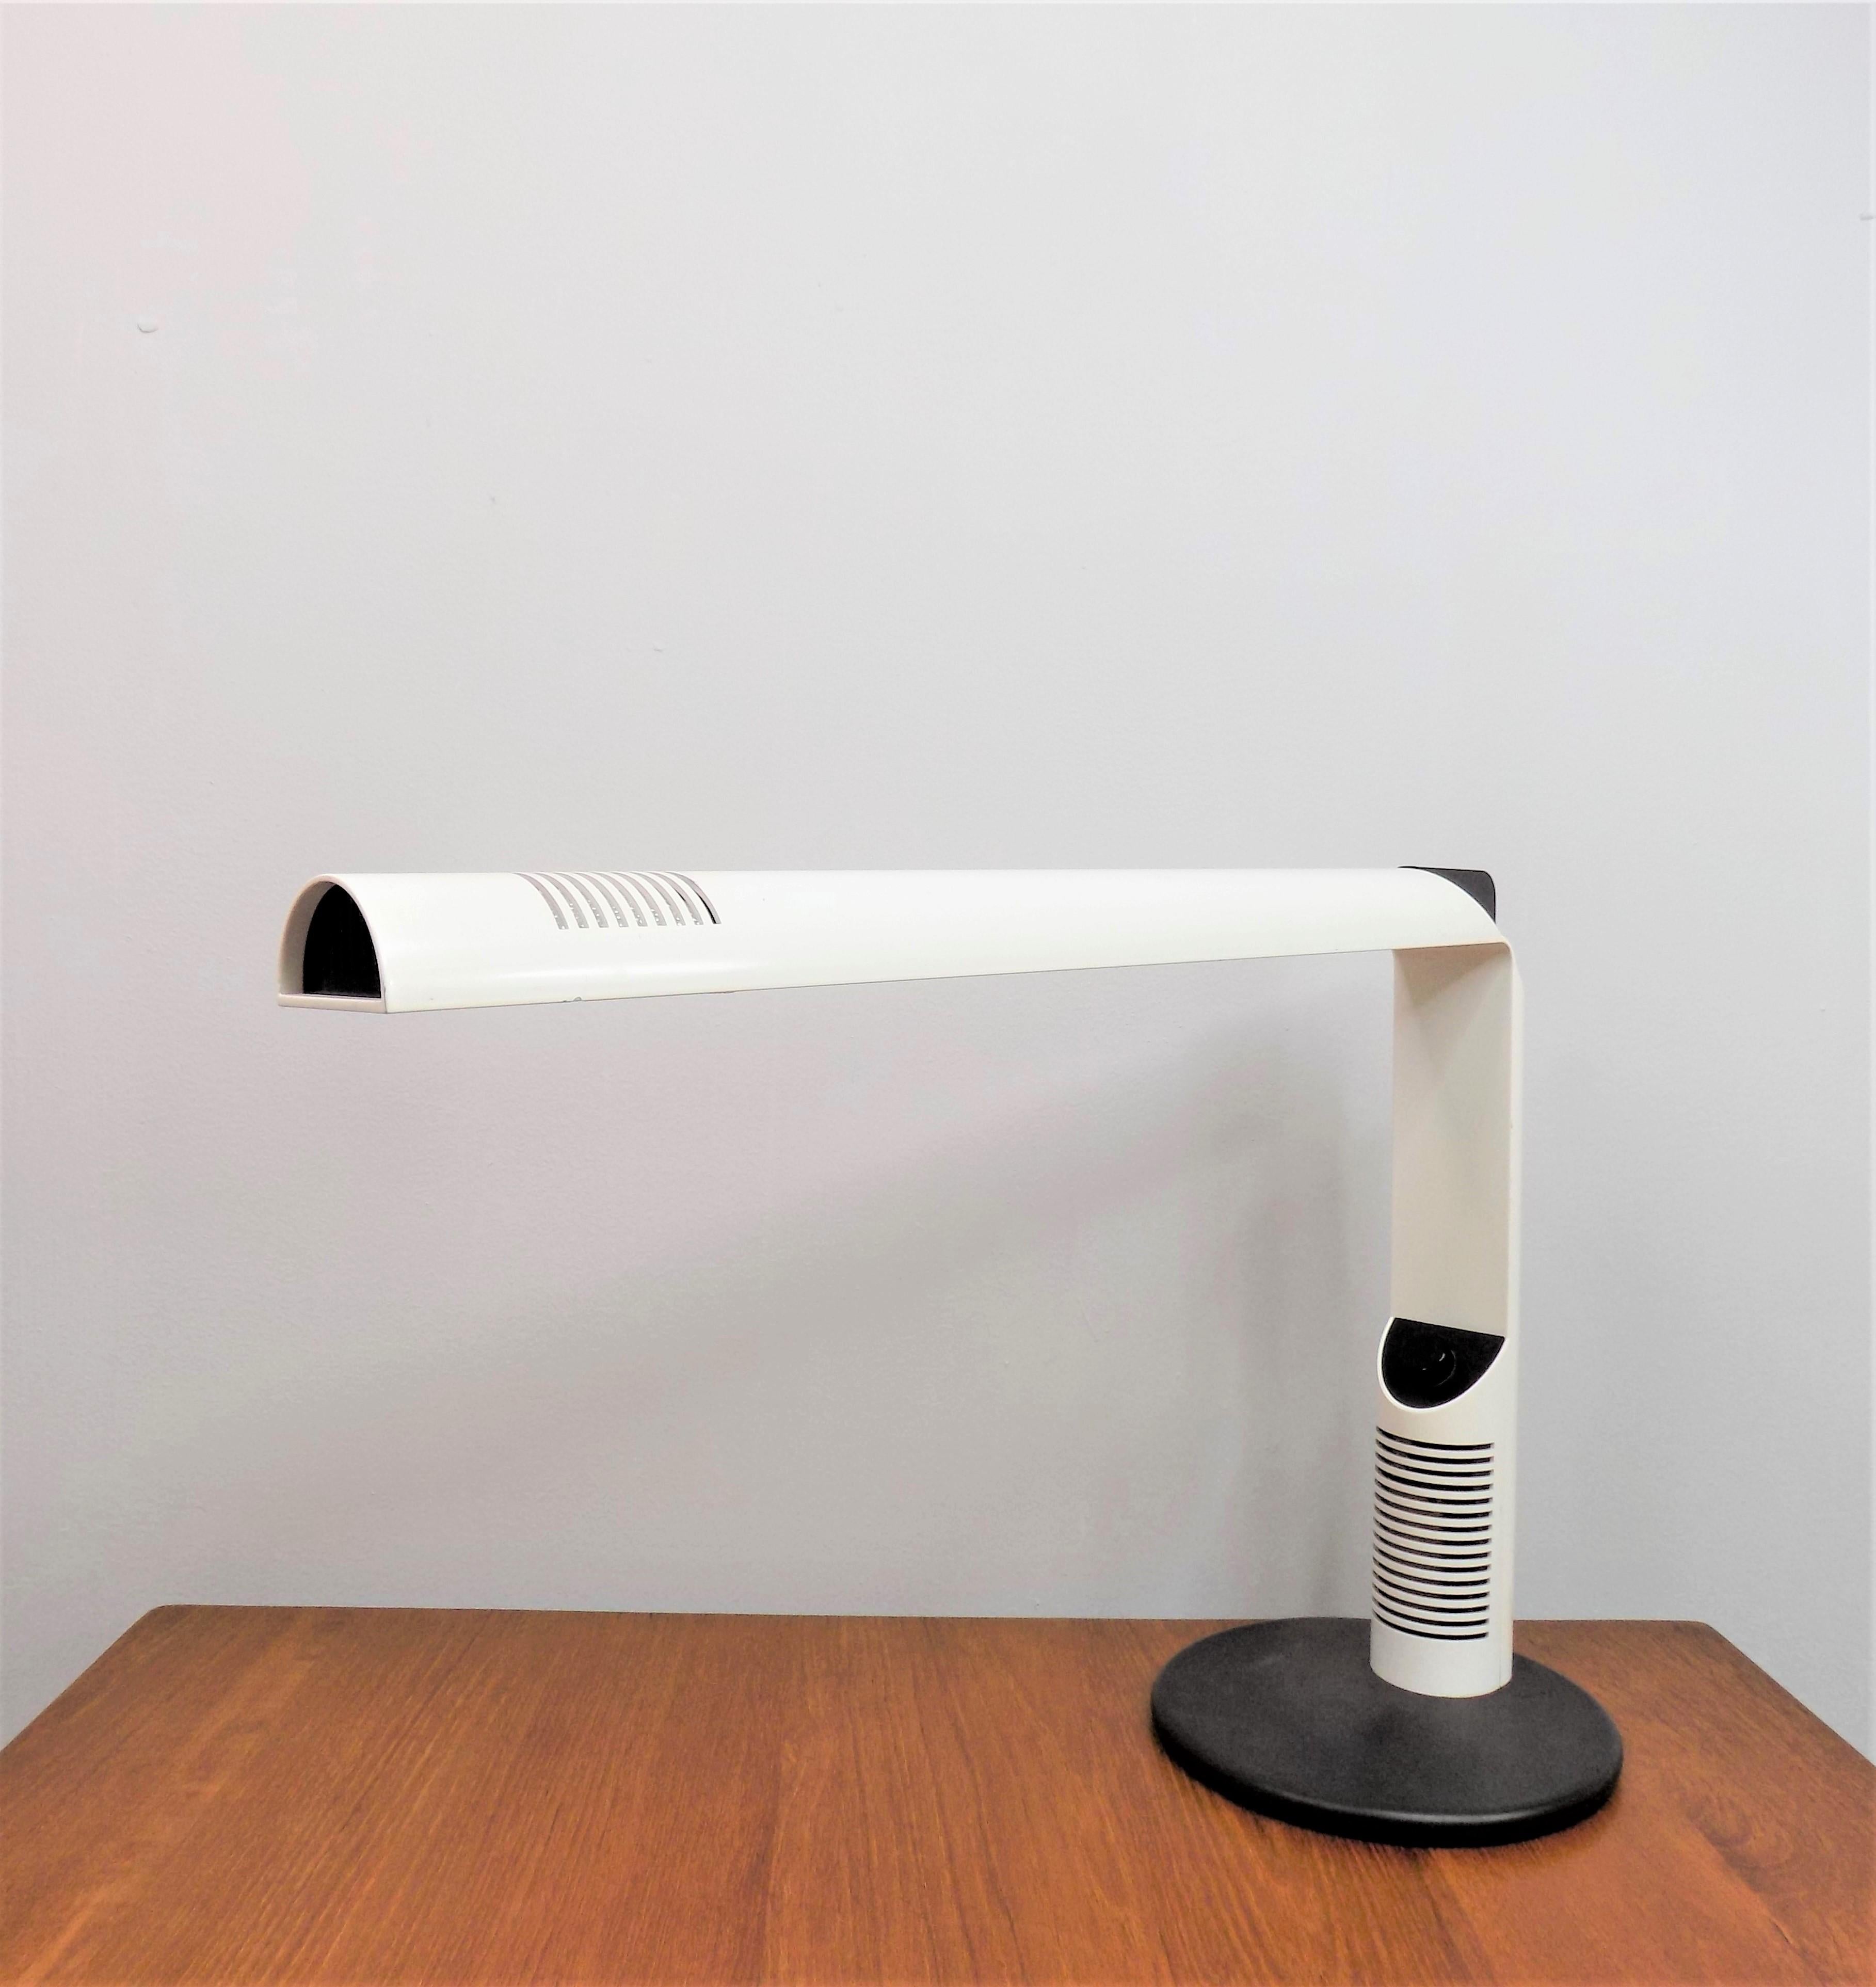 This Luci Abele table lamp, manufactured in a white plastic with black applications , is in very good condition. The plastic case shows minimal signs of wear, as does the black metal base. The table lamp with its timeless, always modern-looking